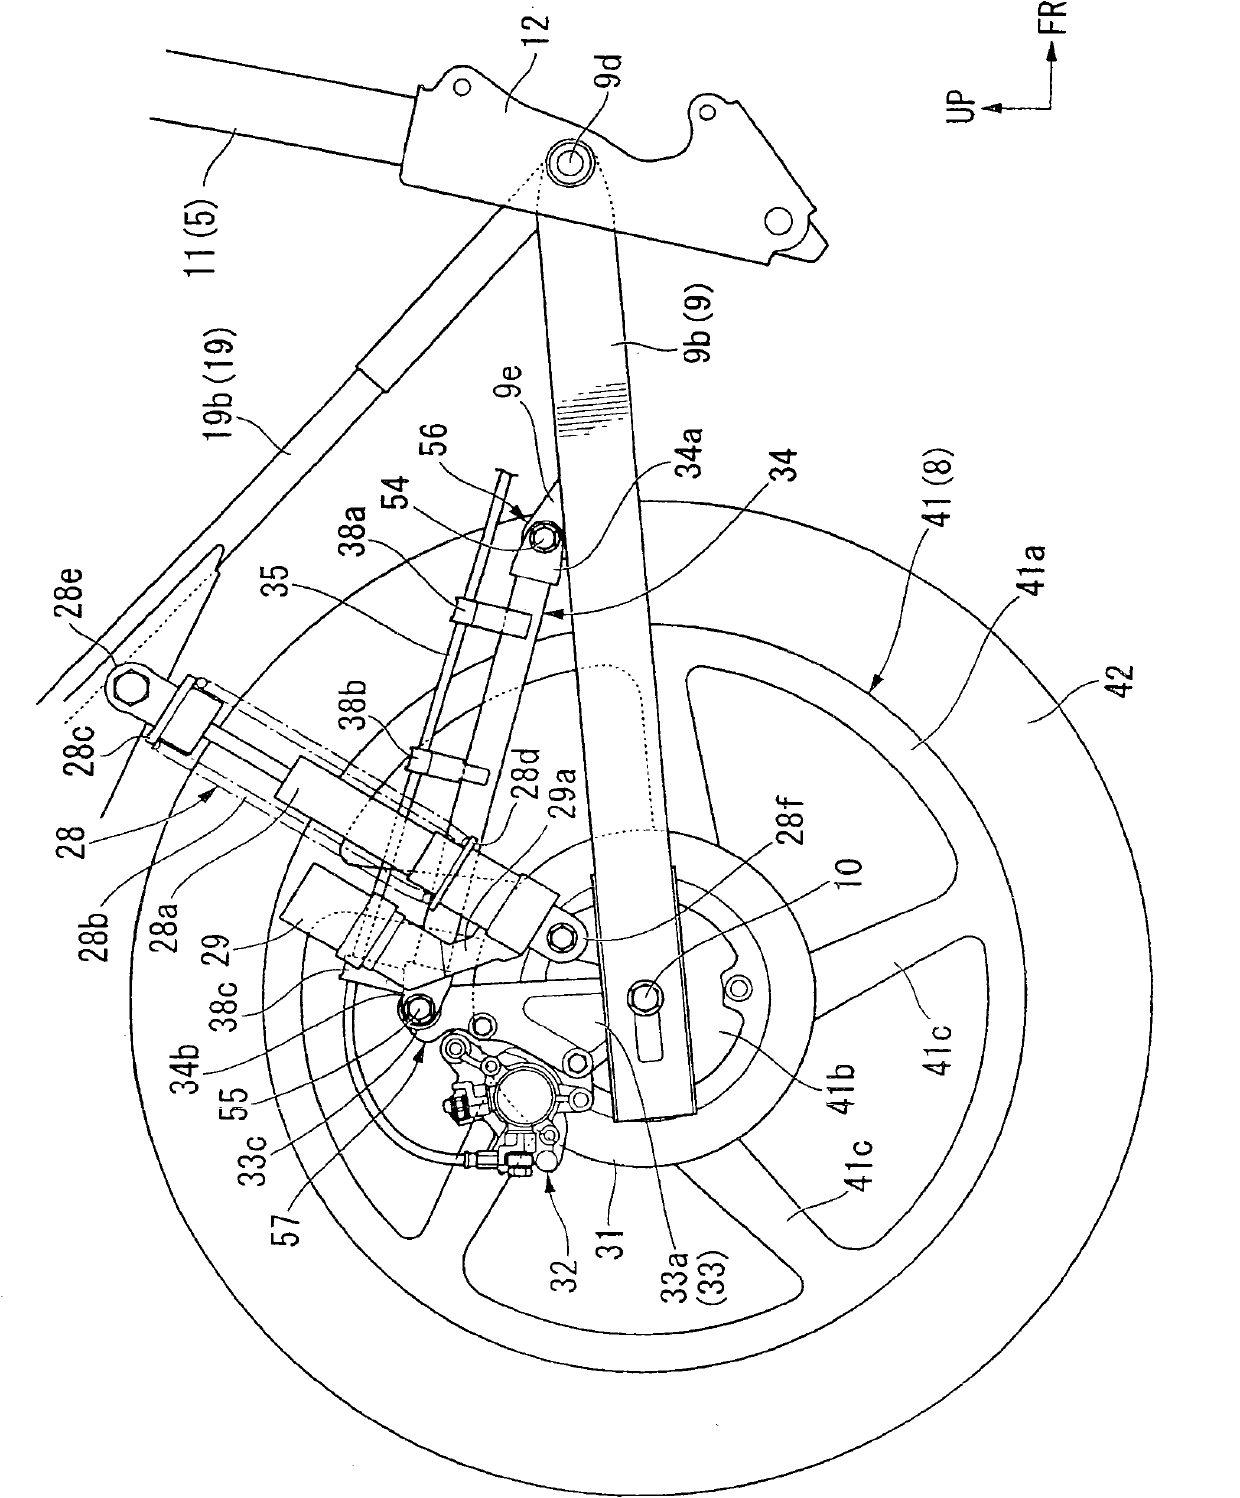 Structure and method of assembling and disassembling a rear wheel of a motor bicycle